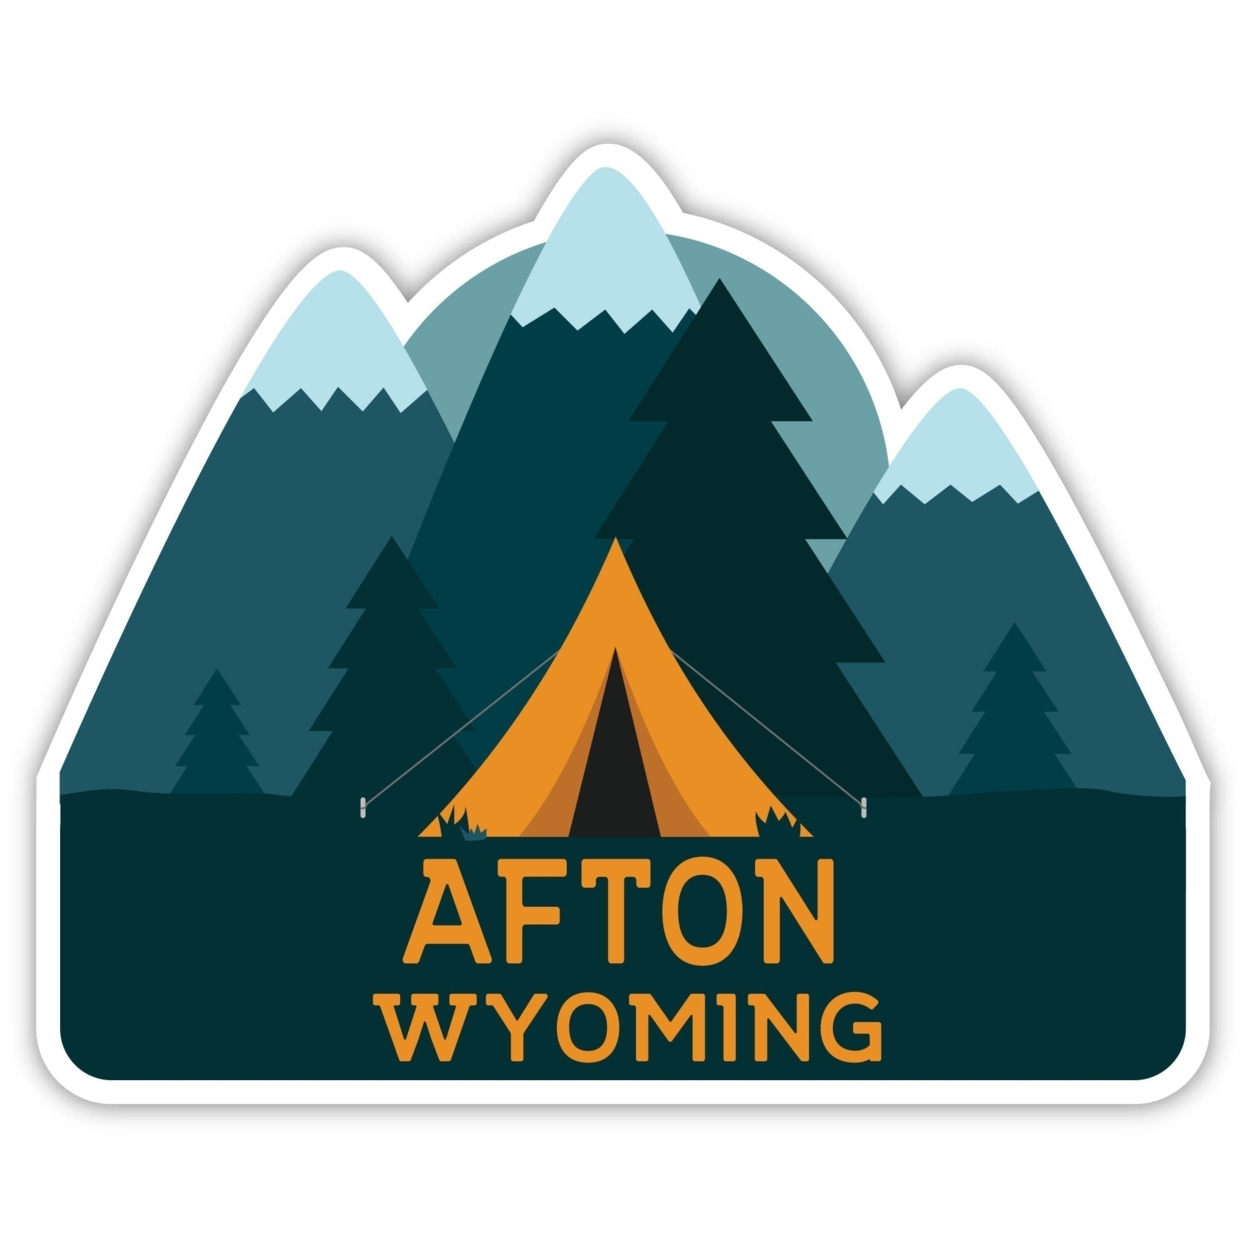 Afton Wyoming Souvenir Decorative Stickers (Choose Theme And Size) - Single Unit, 8-Inch, Tent